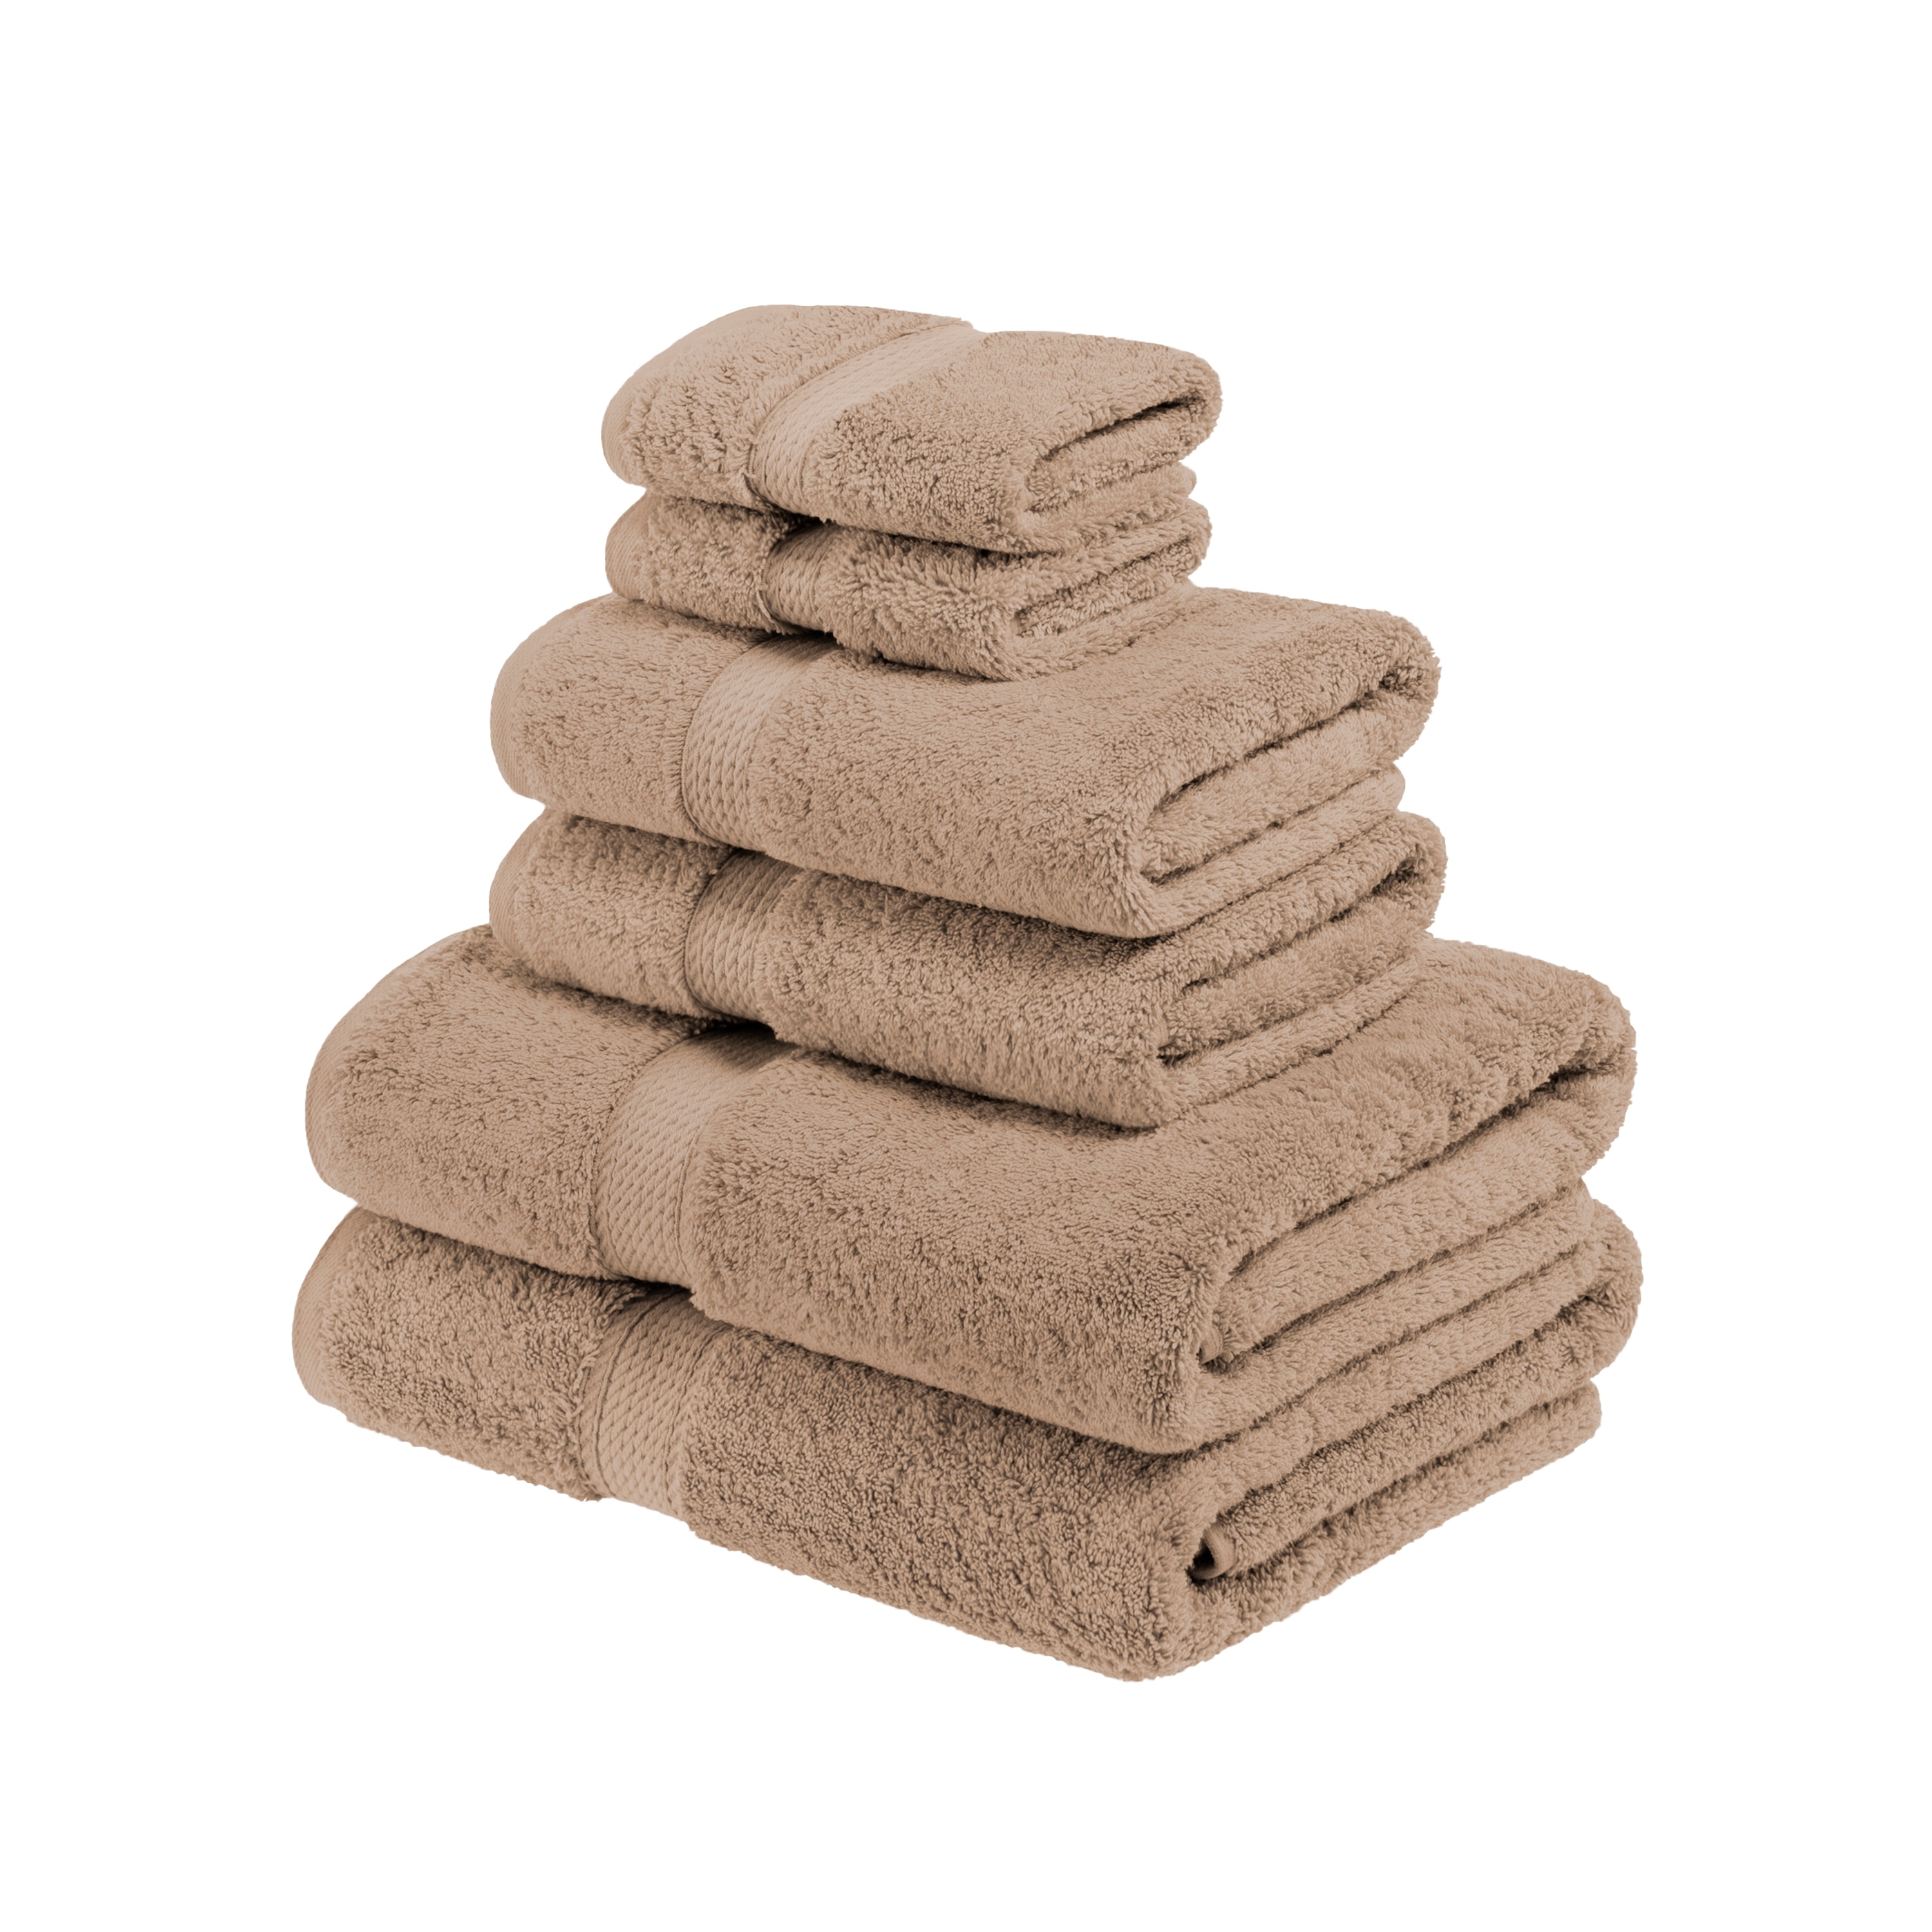 https://ak1.ostkcdn.com/images/products/is/images/direct/feb84b8c05d36df826ff9fcebe55994672b1223f/Superior-Marche-Egyptian-Cotton-6-Piece-Towel-Set.jpg